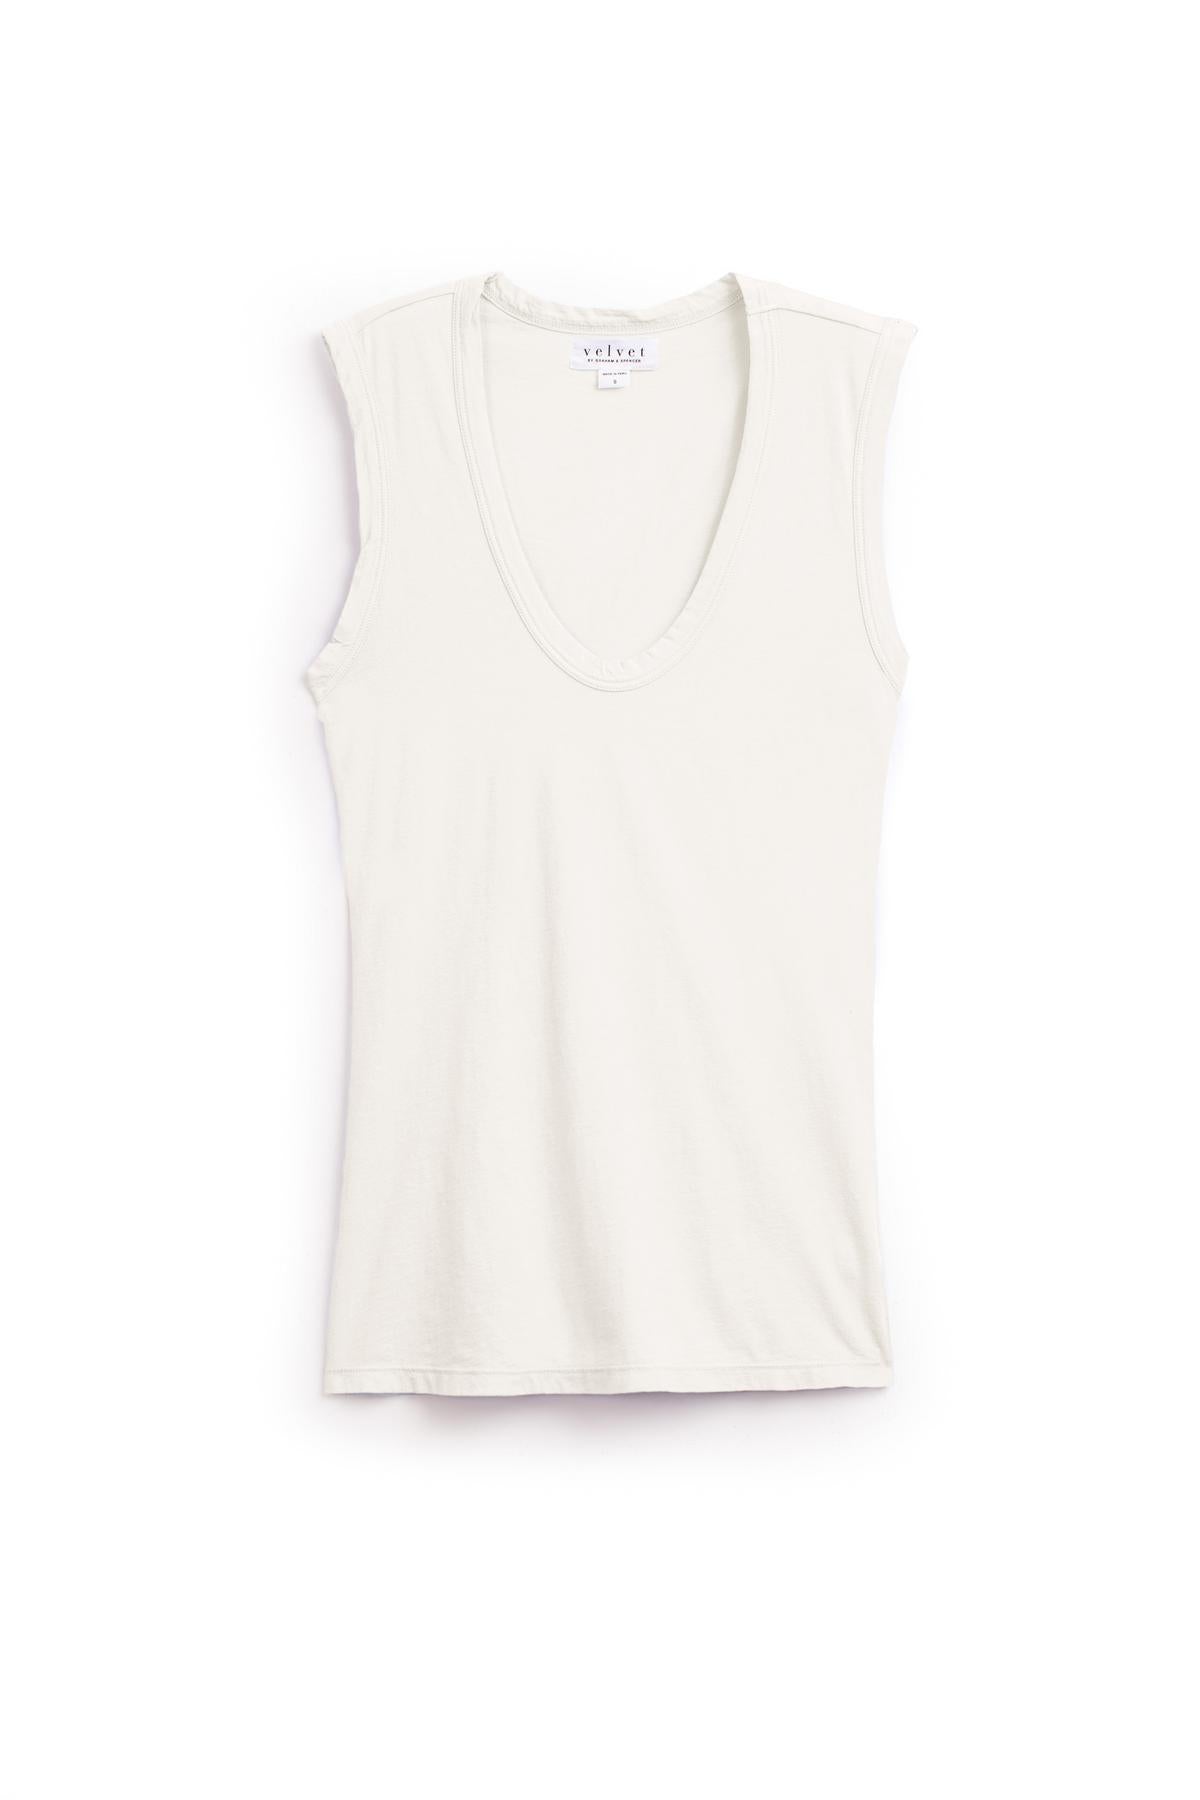   A soft and wearable Velvet by Graham & Spencer ESTINA GAUZY WHISPER FITTED TANK TOP on a white background. 